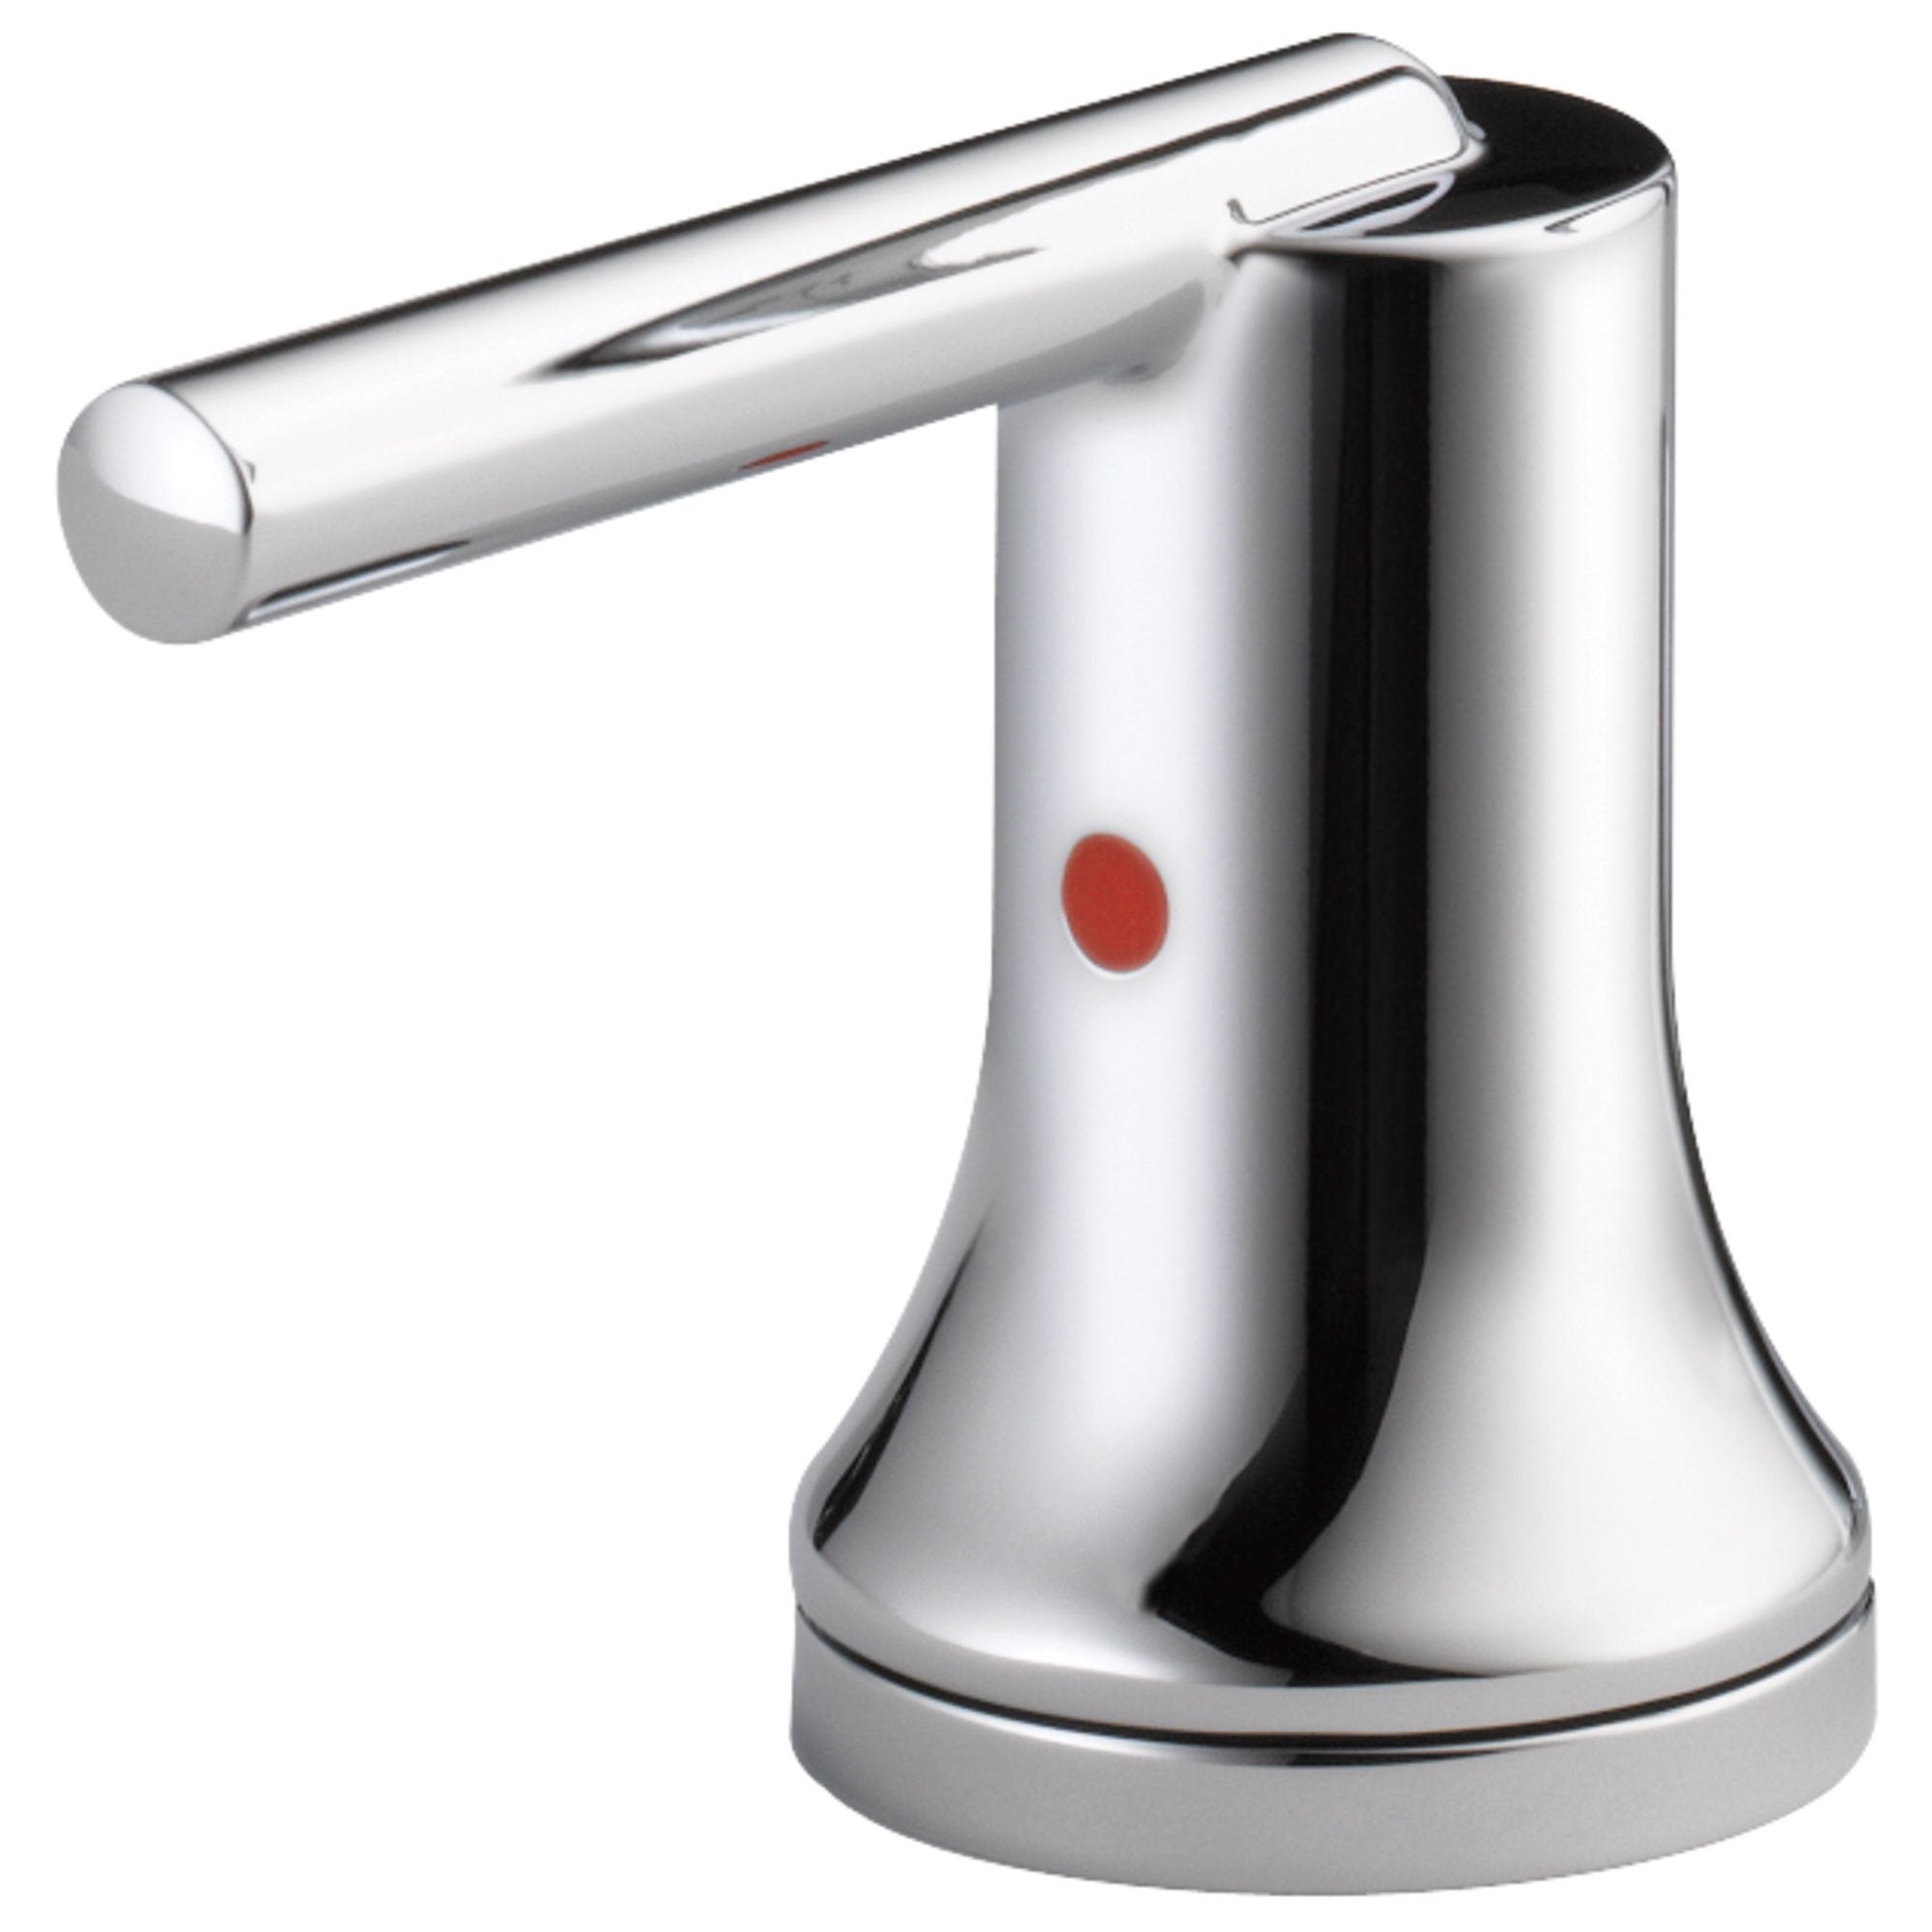 Delta Trinsic Collection Chrome Finish Lavatory Lever Handles - Quantity 2 Included DH259